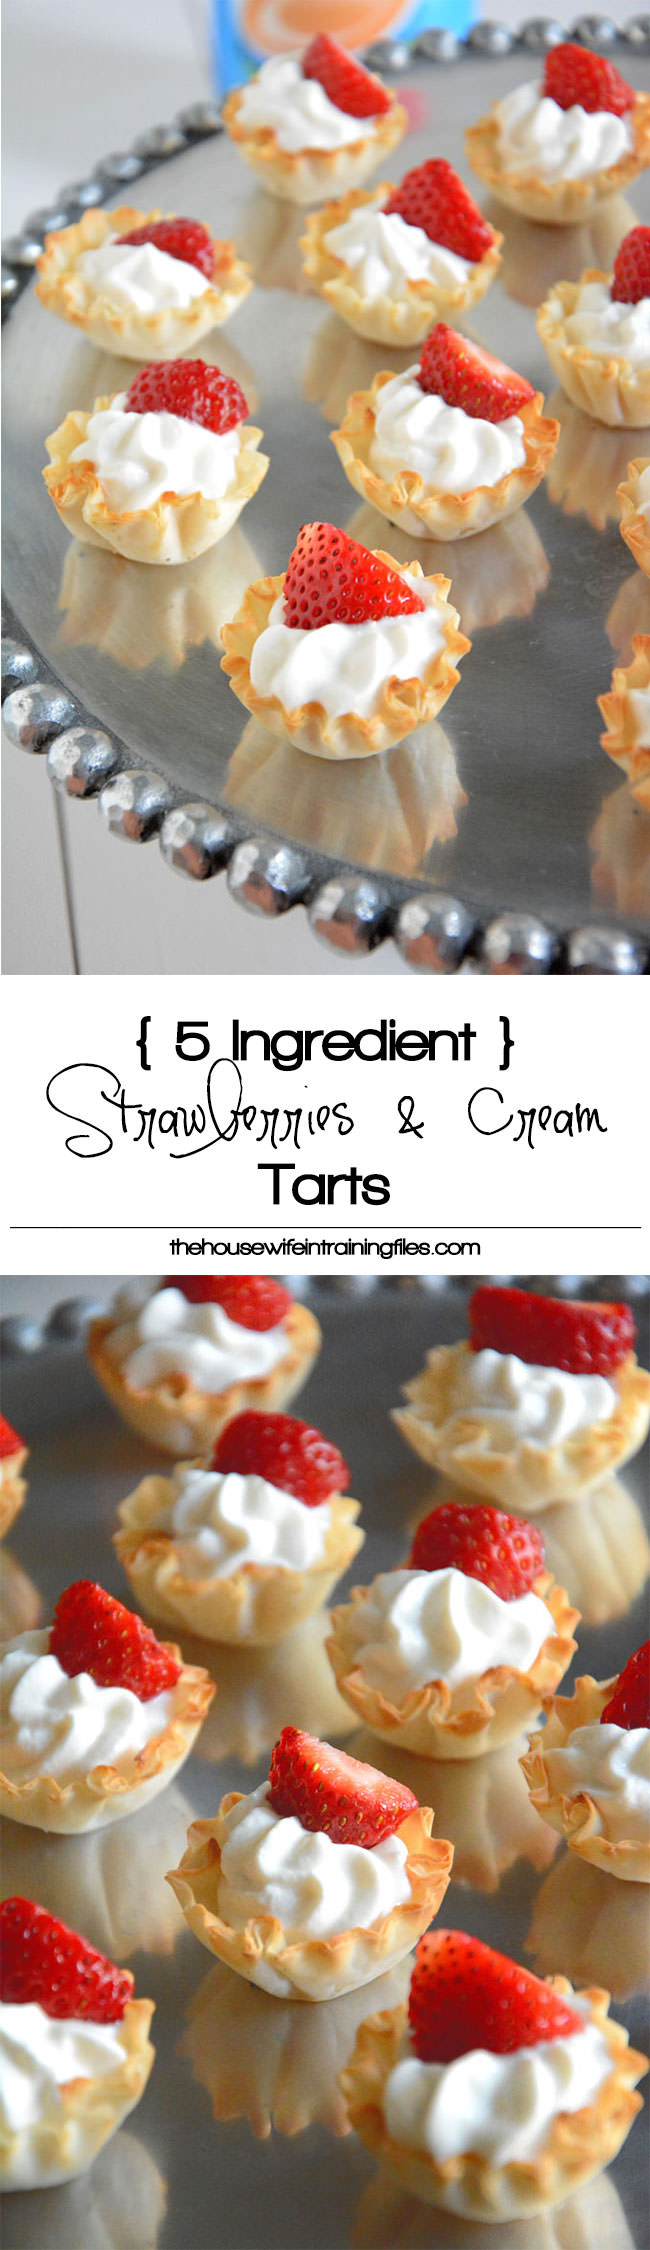 A simple, no bake dessert that is ready in minutes! Strawberries and Cream Tarts are vanilla greek yogurt custard filled phyllo cups are bite size and healthy so you won't feel bad having more than one! #dessert #easy #strawberry #5ingredients